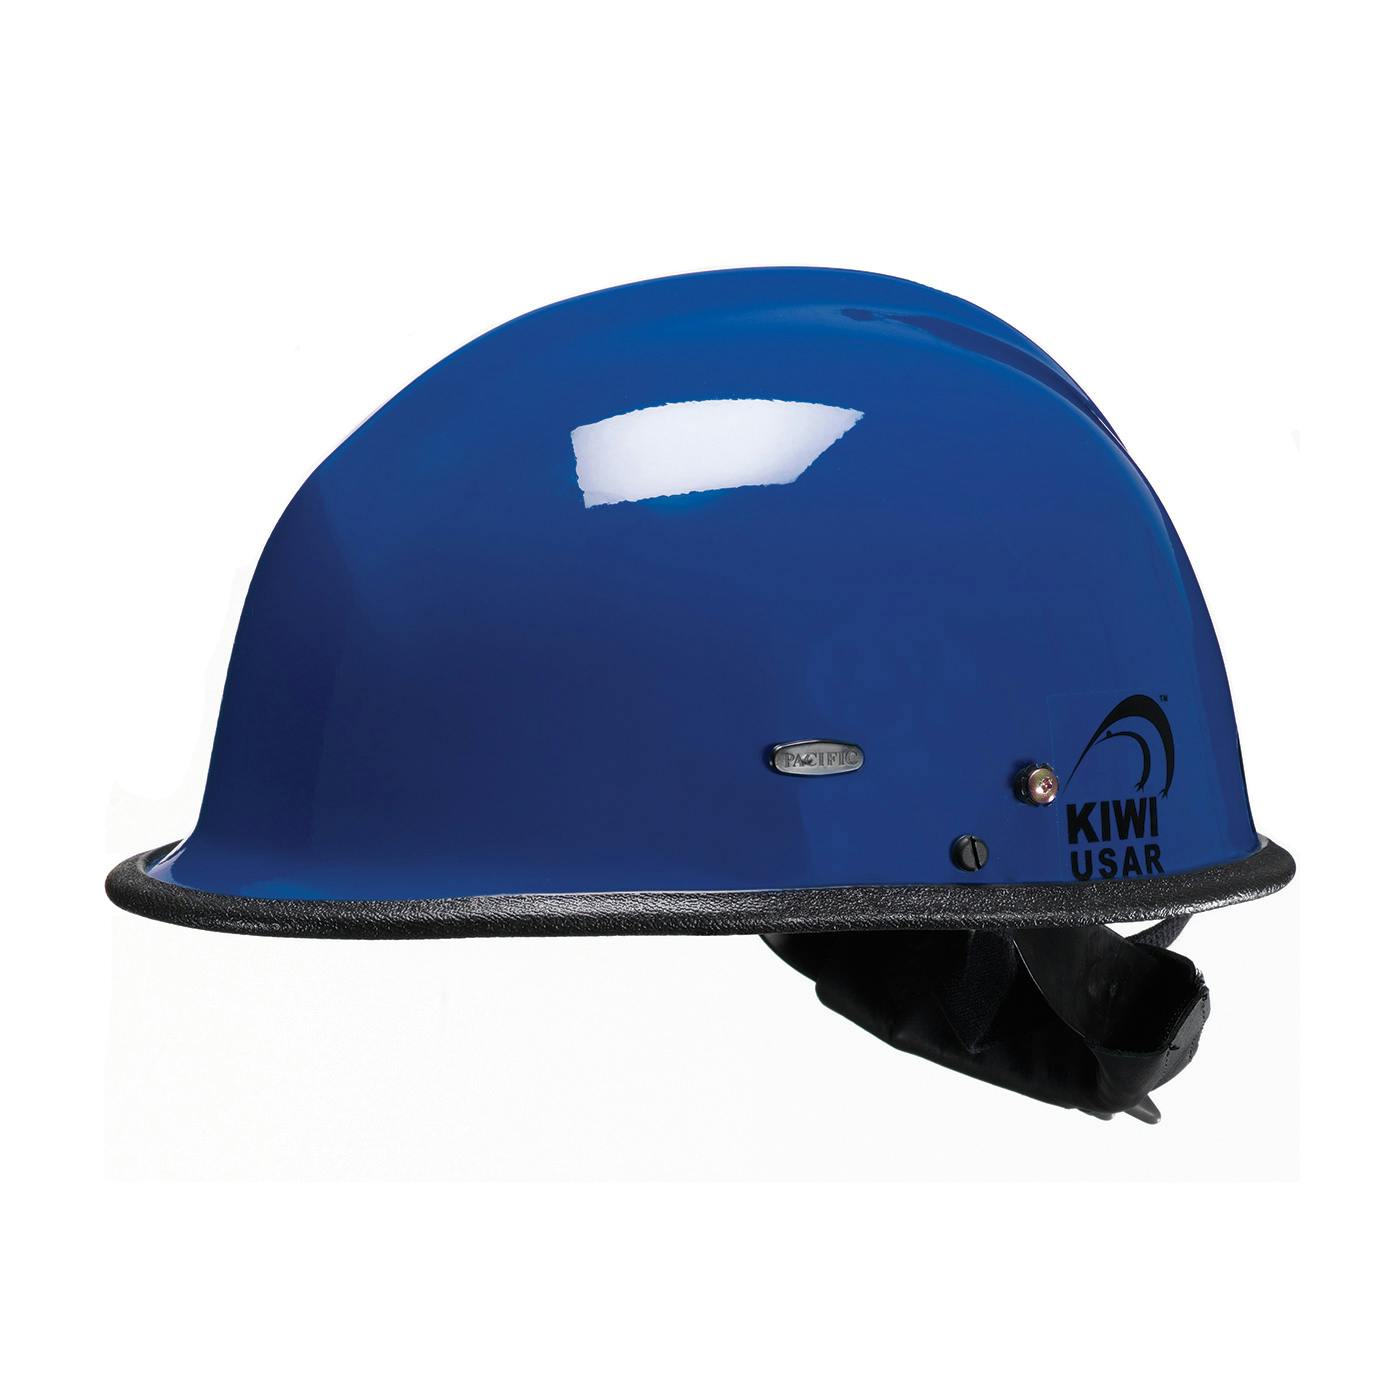 R3V4 KIWI USAR™ Rescue Helmet with ESS Goggle Mounts and Retractable Eye Protector (804-340X)_1